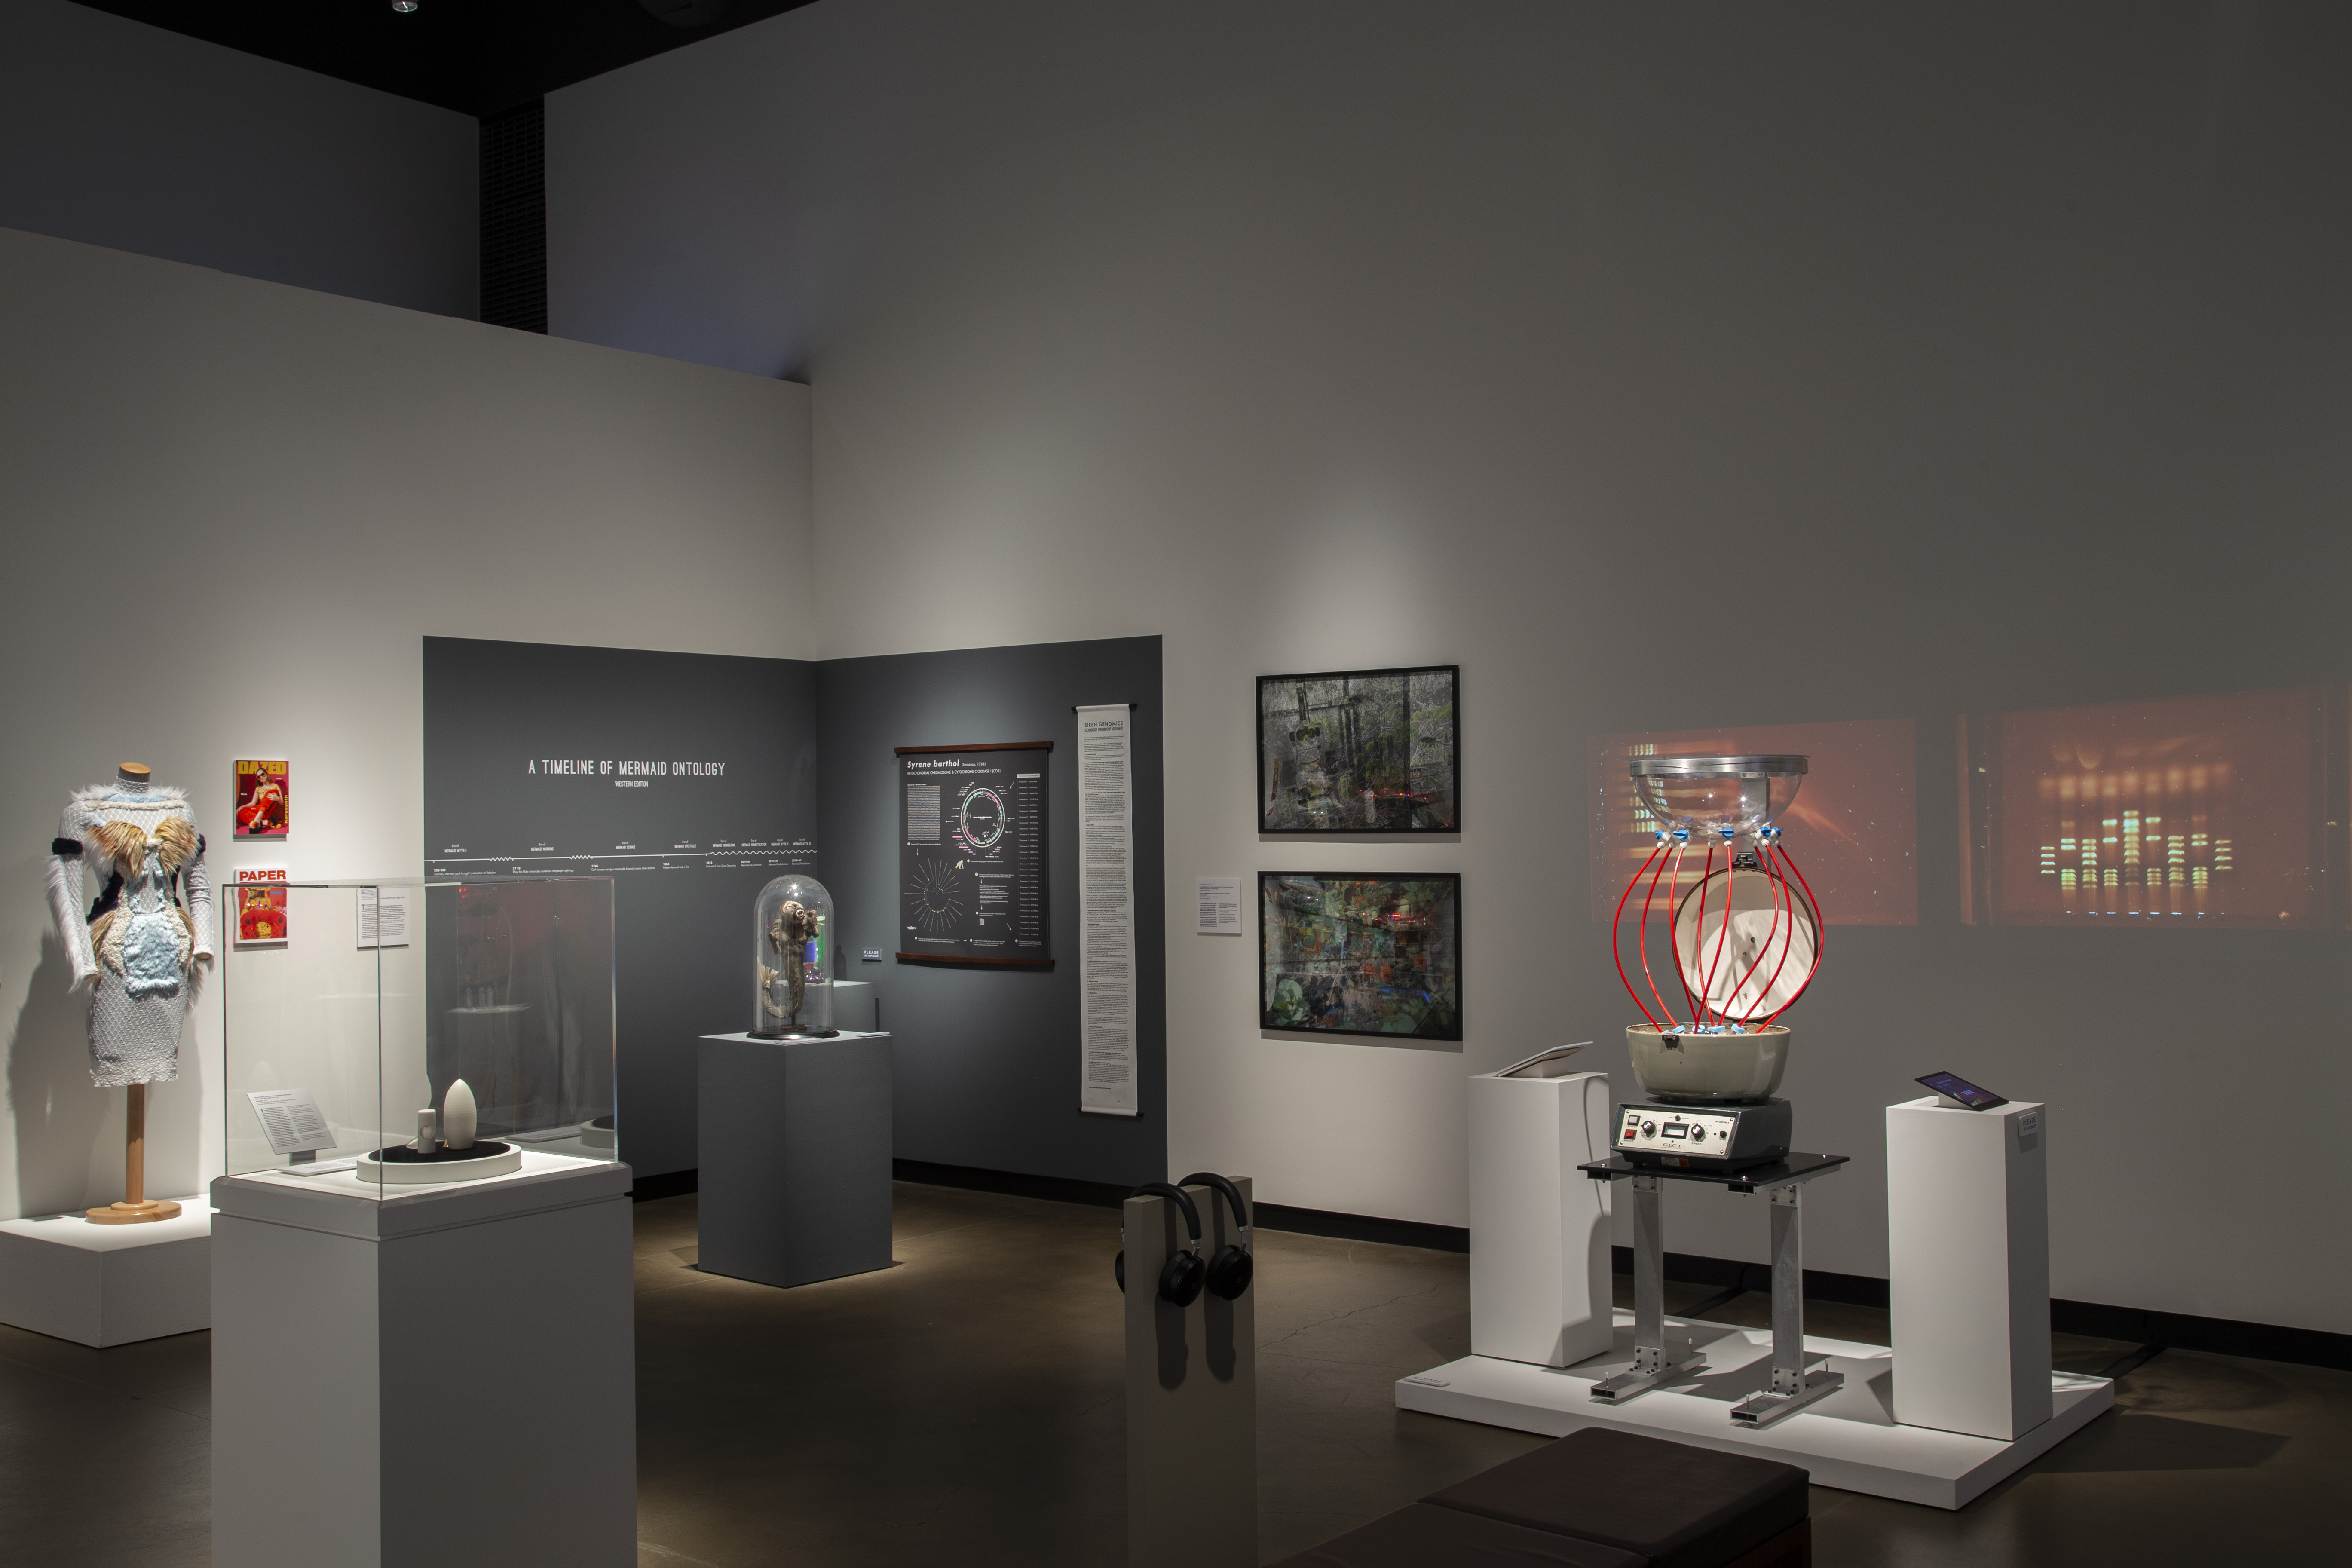 rt’s Work in the Age of Biotechnology at the Gregg Museum of Art and Design in Raleigh, NC. Installation image by Matthew Gay, courtesy of the Gregg Museum of Art & Design